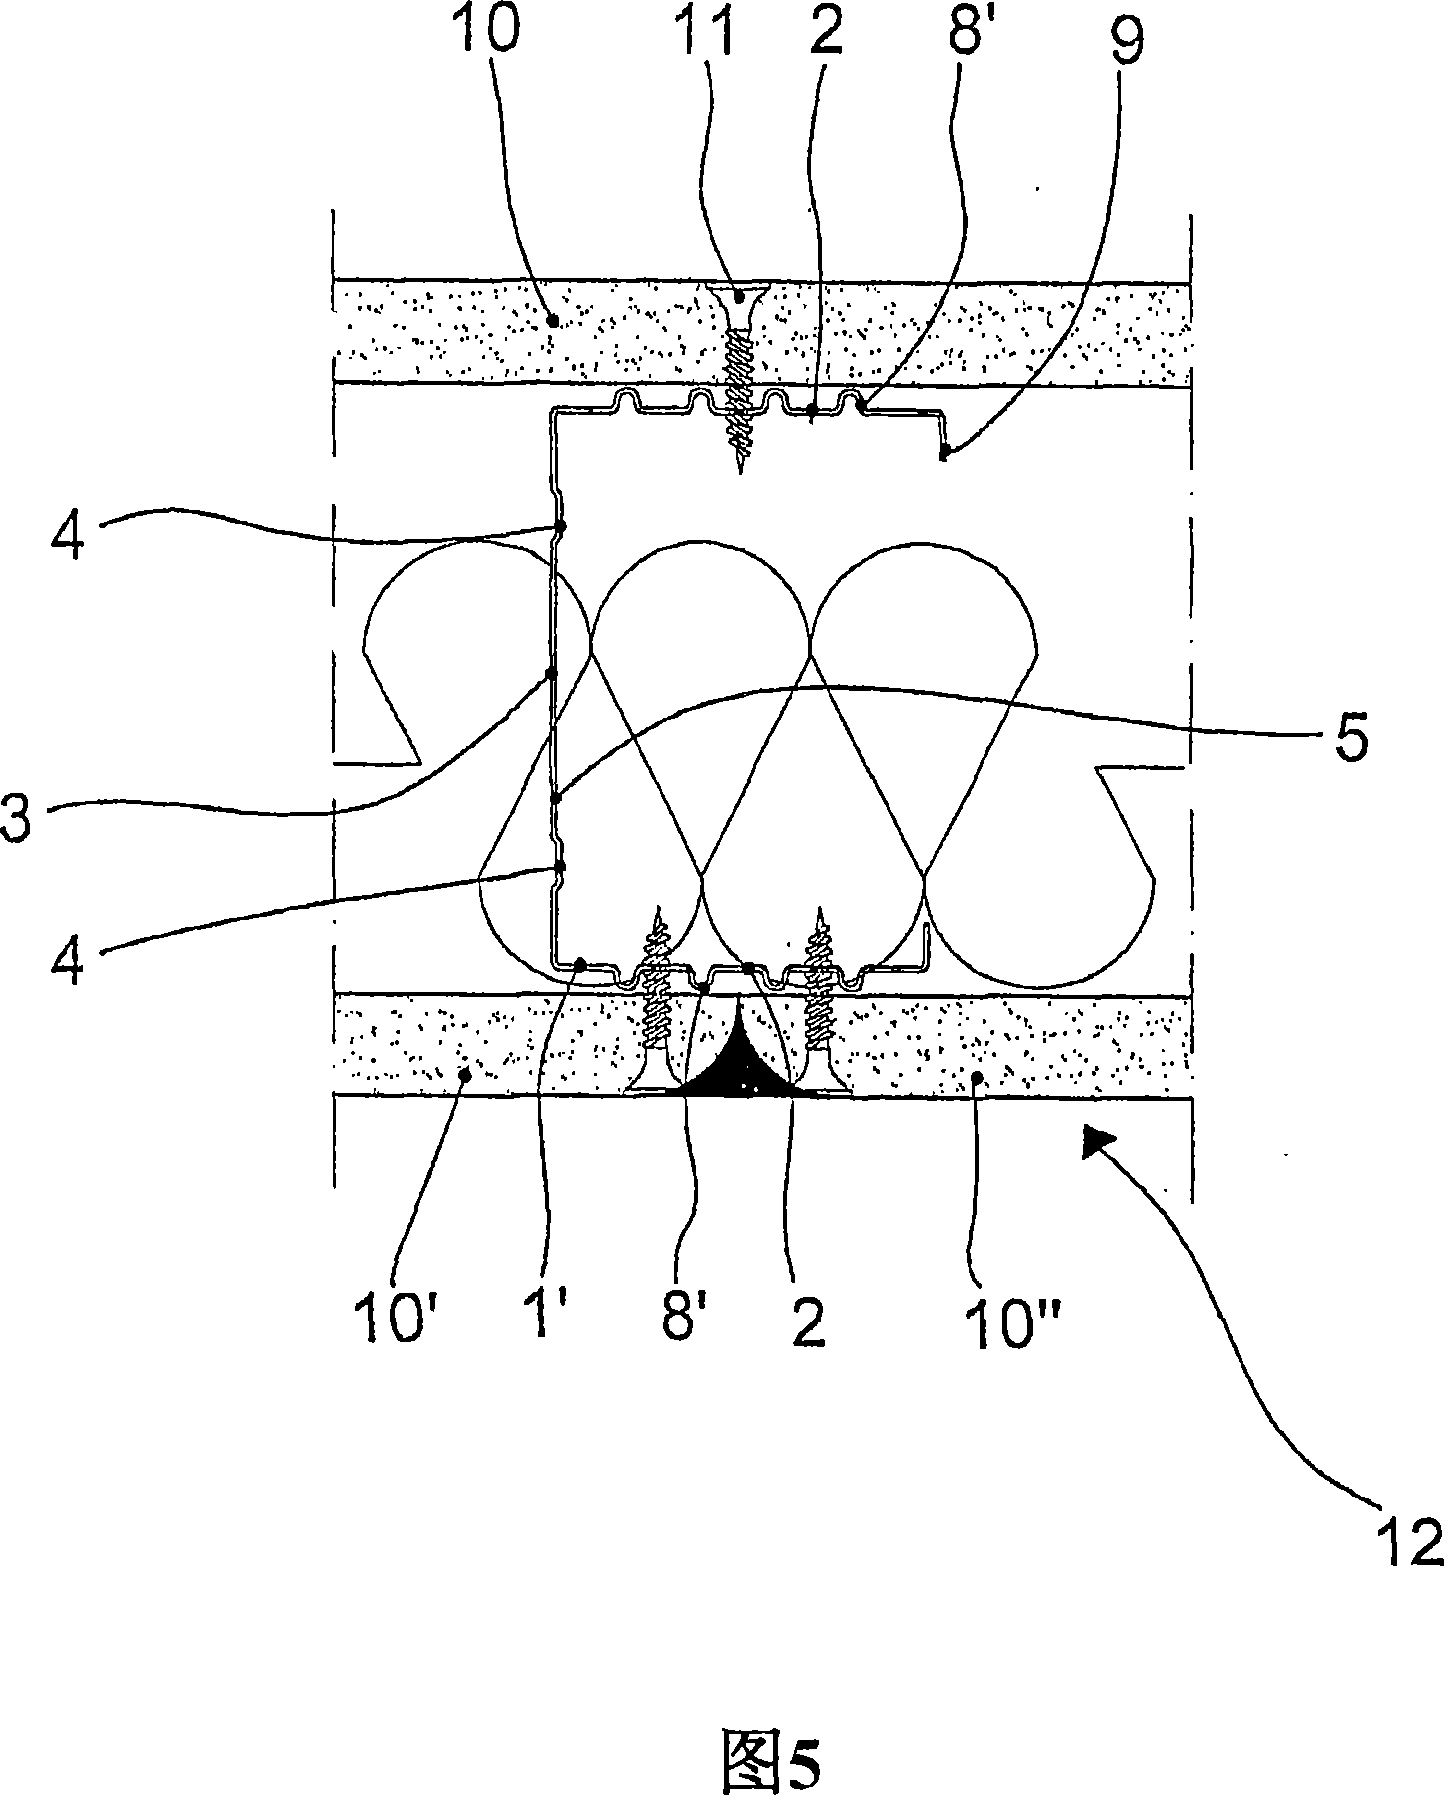 C-shaped profile and partition comprising a C-shaped profile